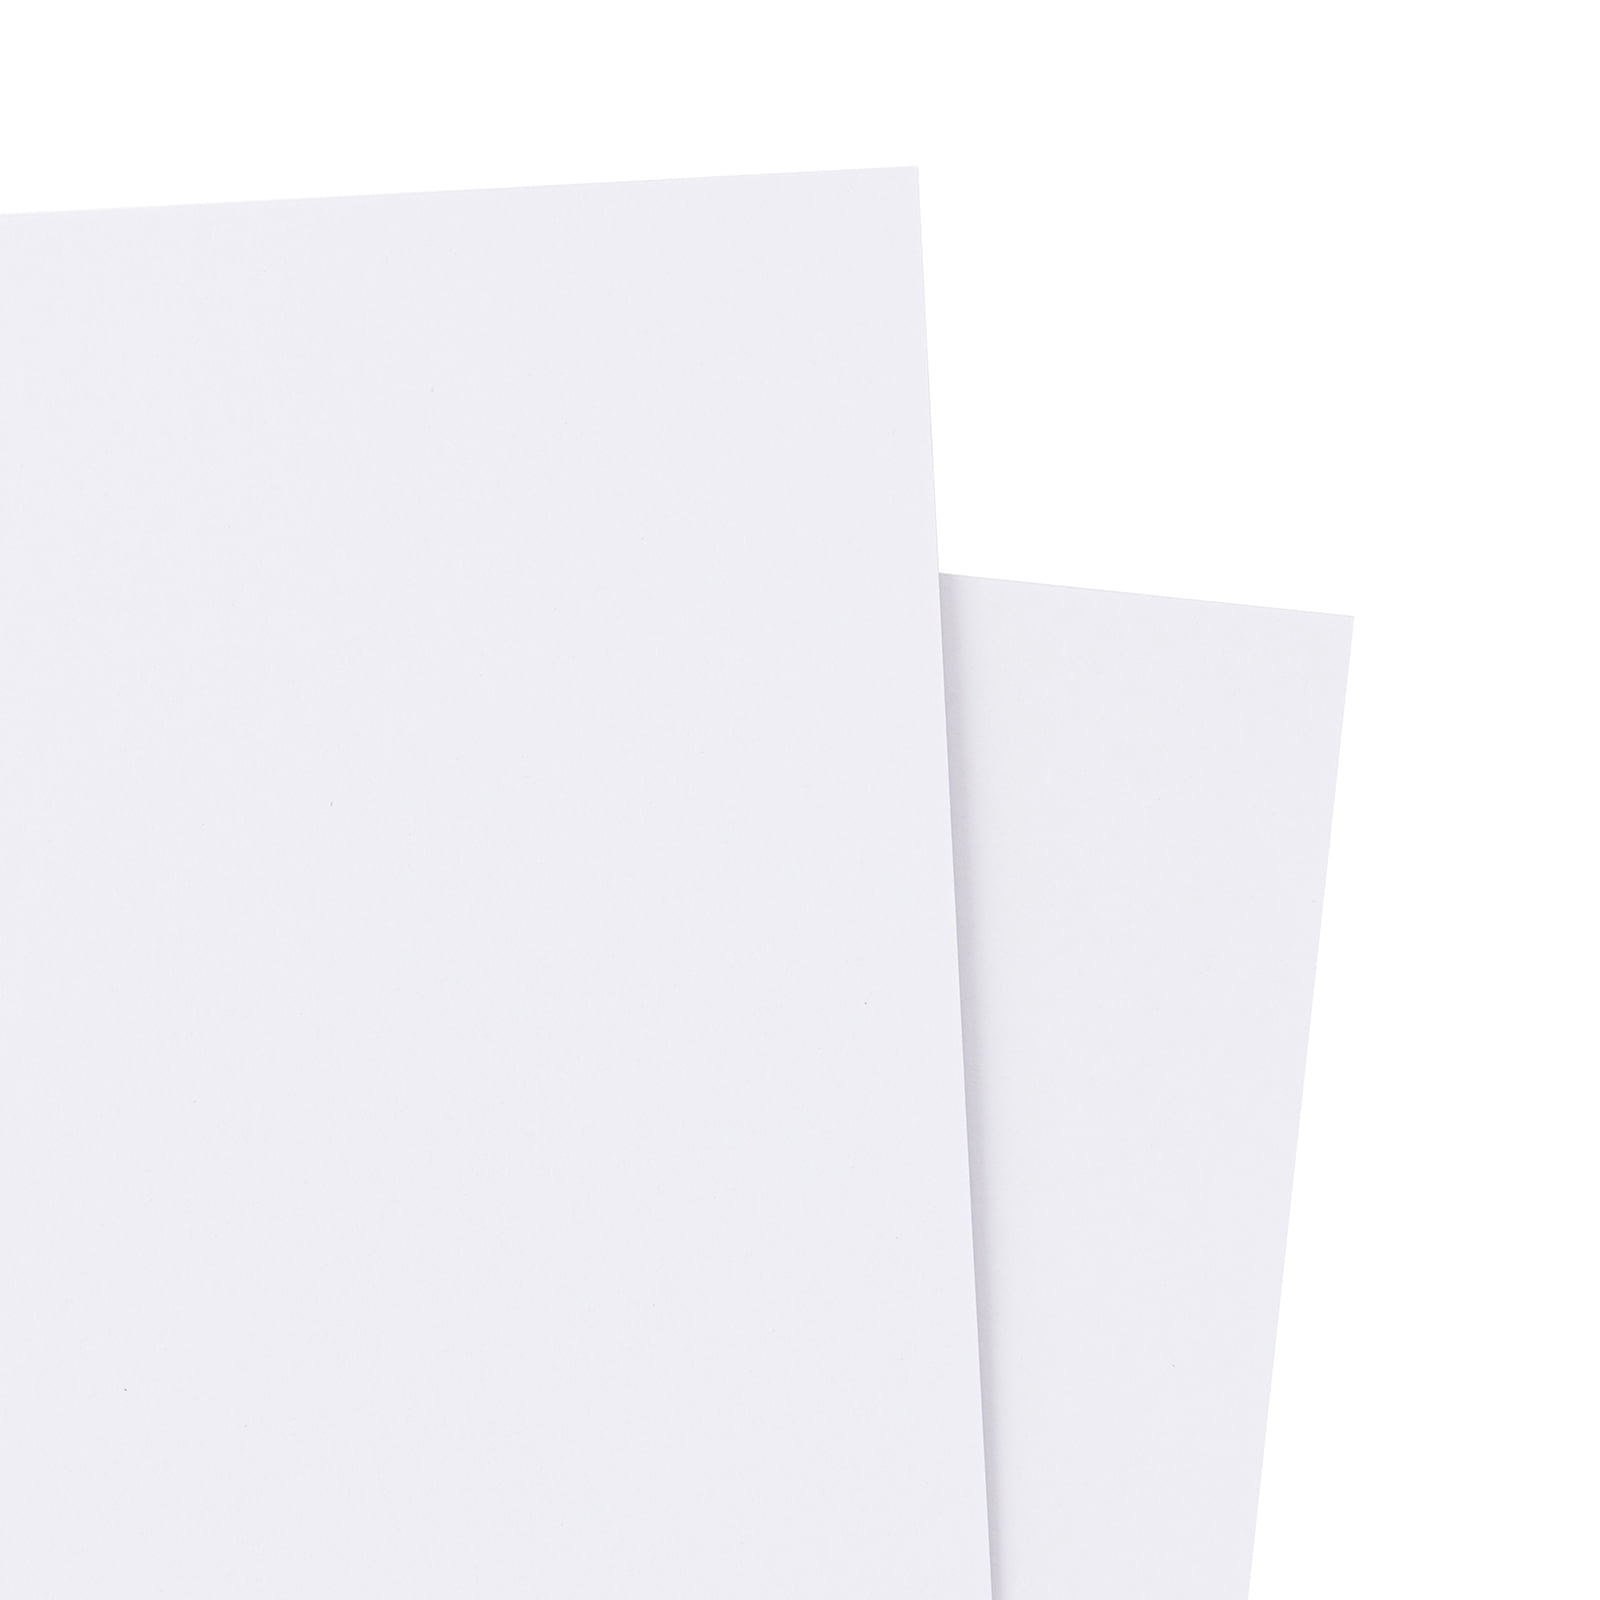 Colorbok Marshmallow White Smooth Cardstock Pad, 8.5x11, 108 lb./160 gsm,  50 Sheets 